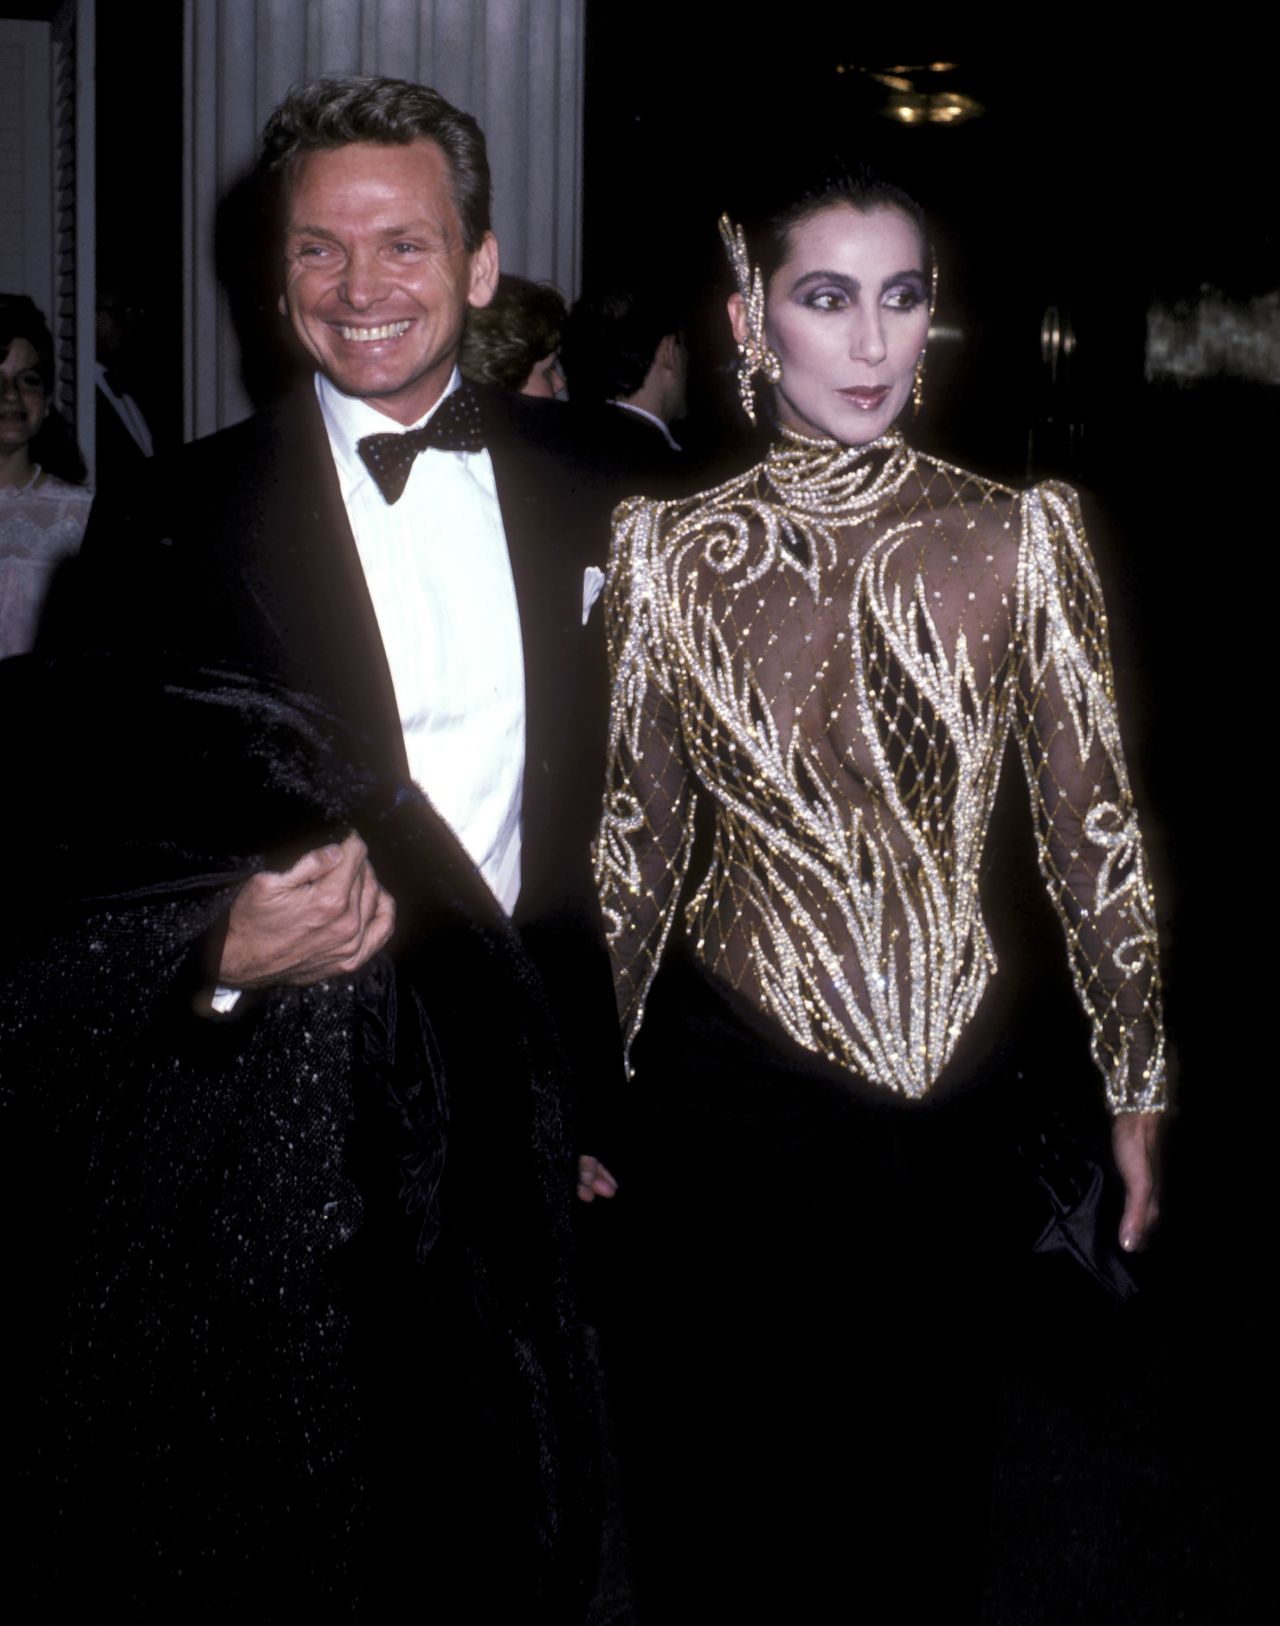 Bob Mackie and Cher attend the Metropolitan Museum's Costume Institute Gala Exhibition of "Costumes of Royal India" in New York City on December 9, 1985. 